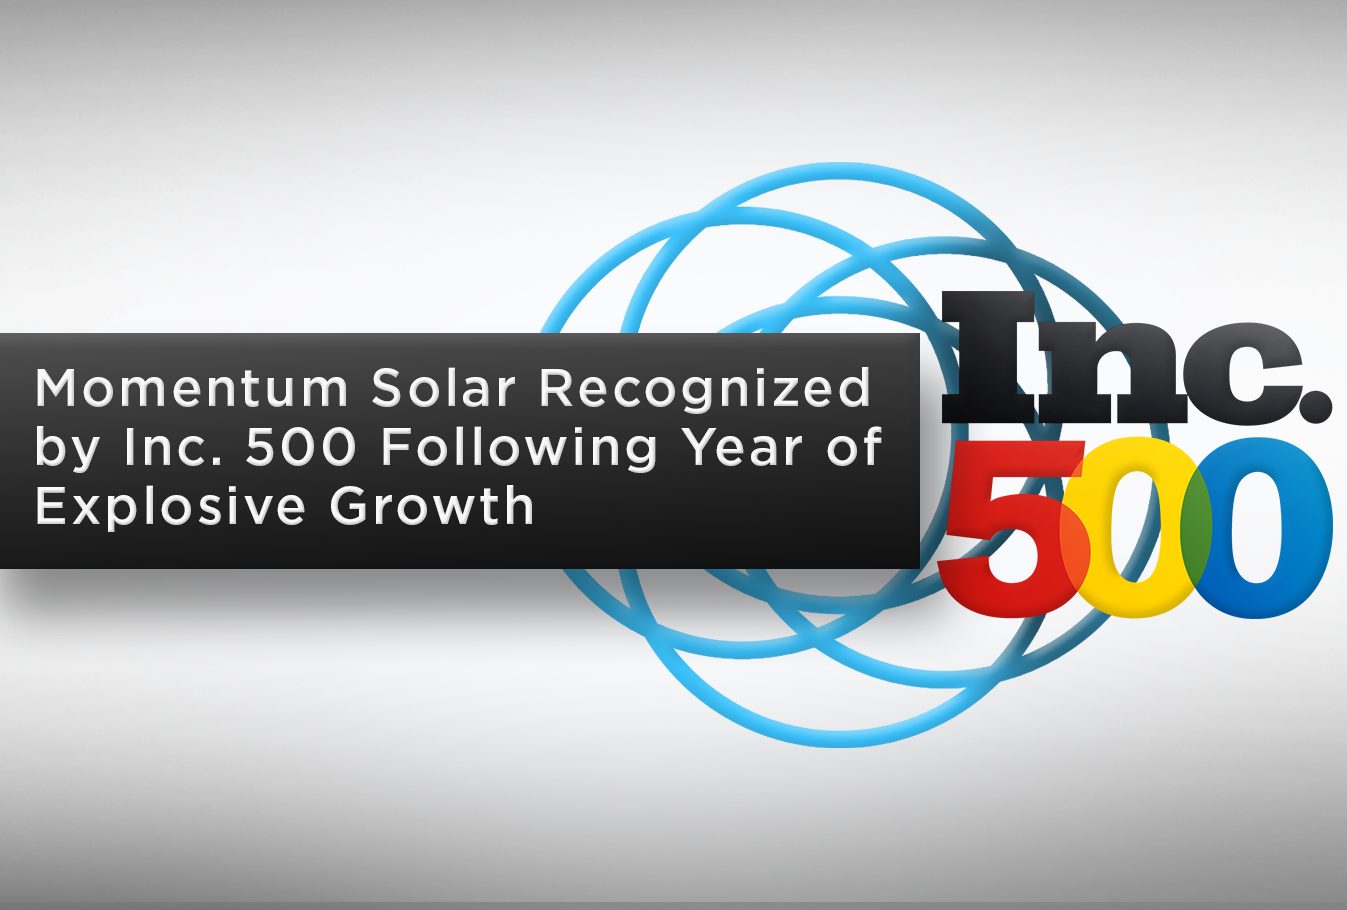 Momentum Solar Recognized by Inc. 500 Following Year of Explosive Growth